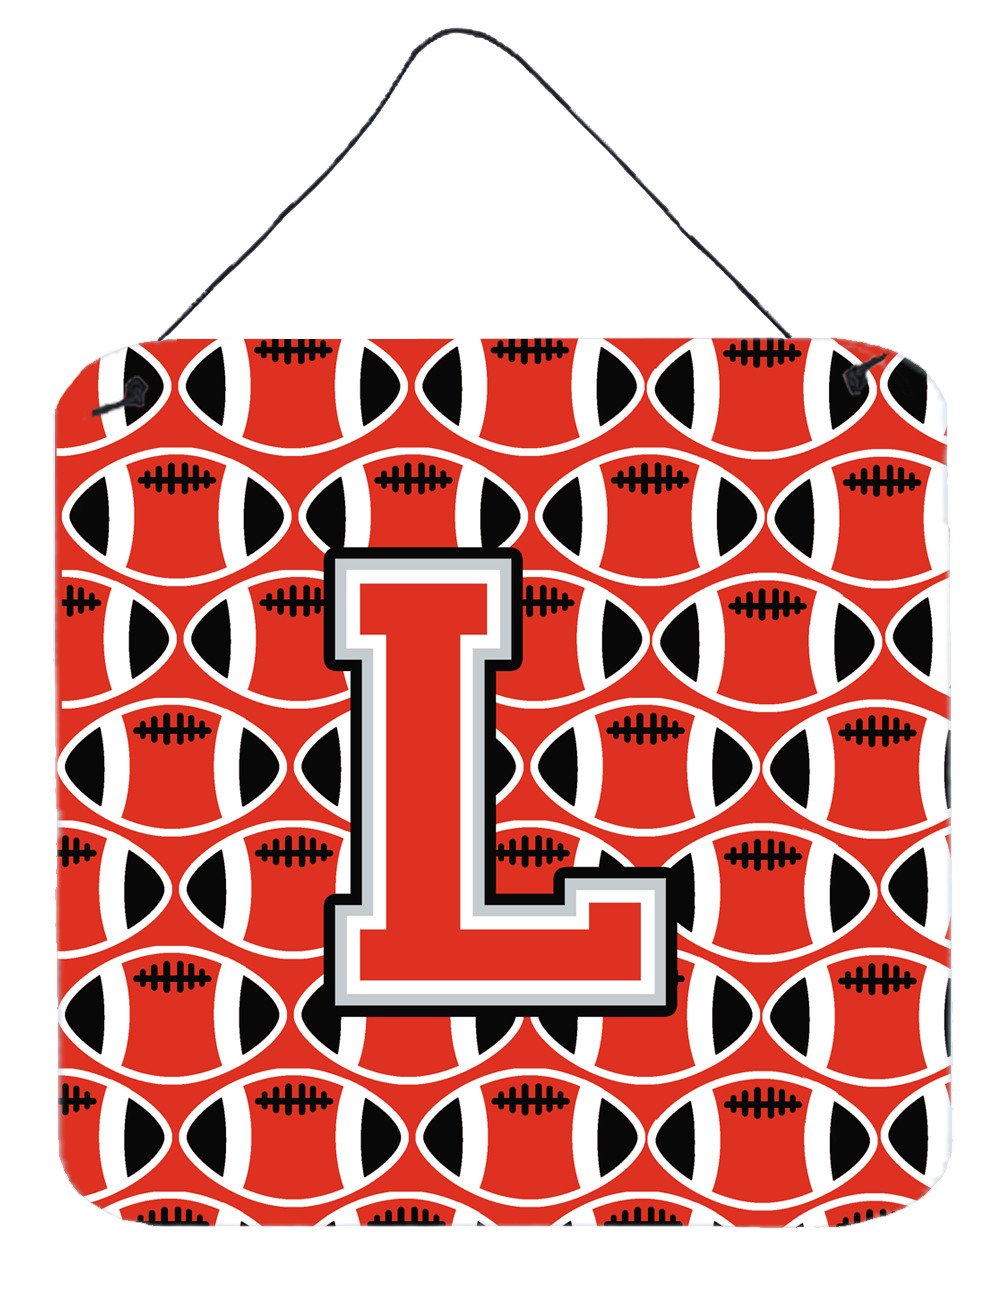 Letter L Football Scarlet and Grey Wall or Door Hanging Prints CJ1067-LDS66 by Caroline's Treasures